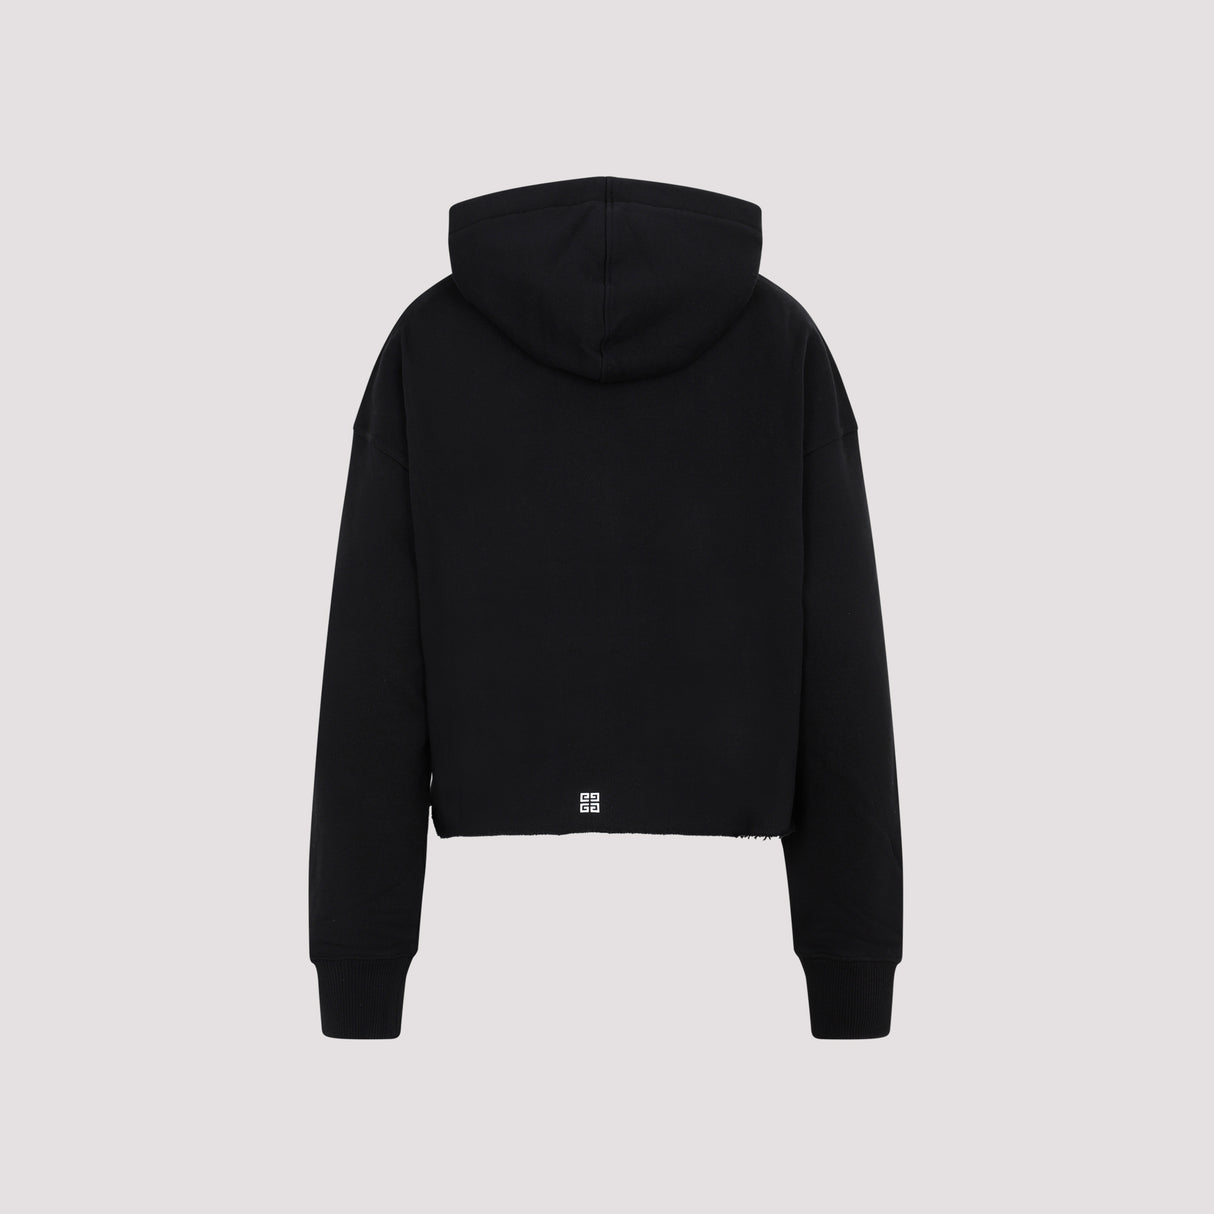 GIVENCHY Black Cotton Sweatshirt for Women - FW23 Collection